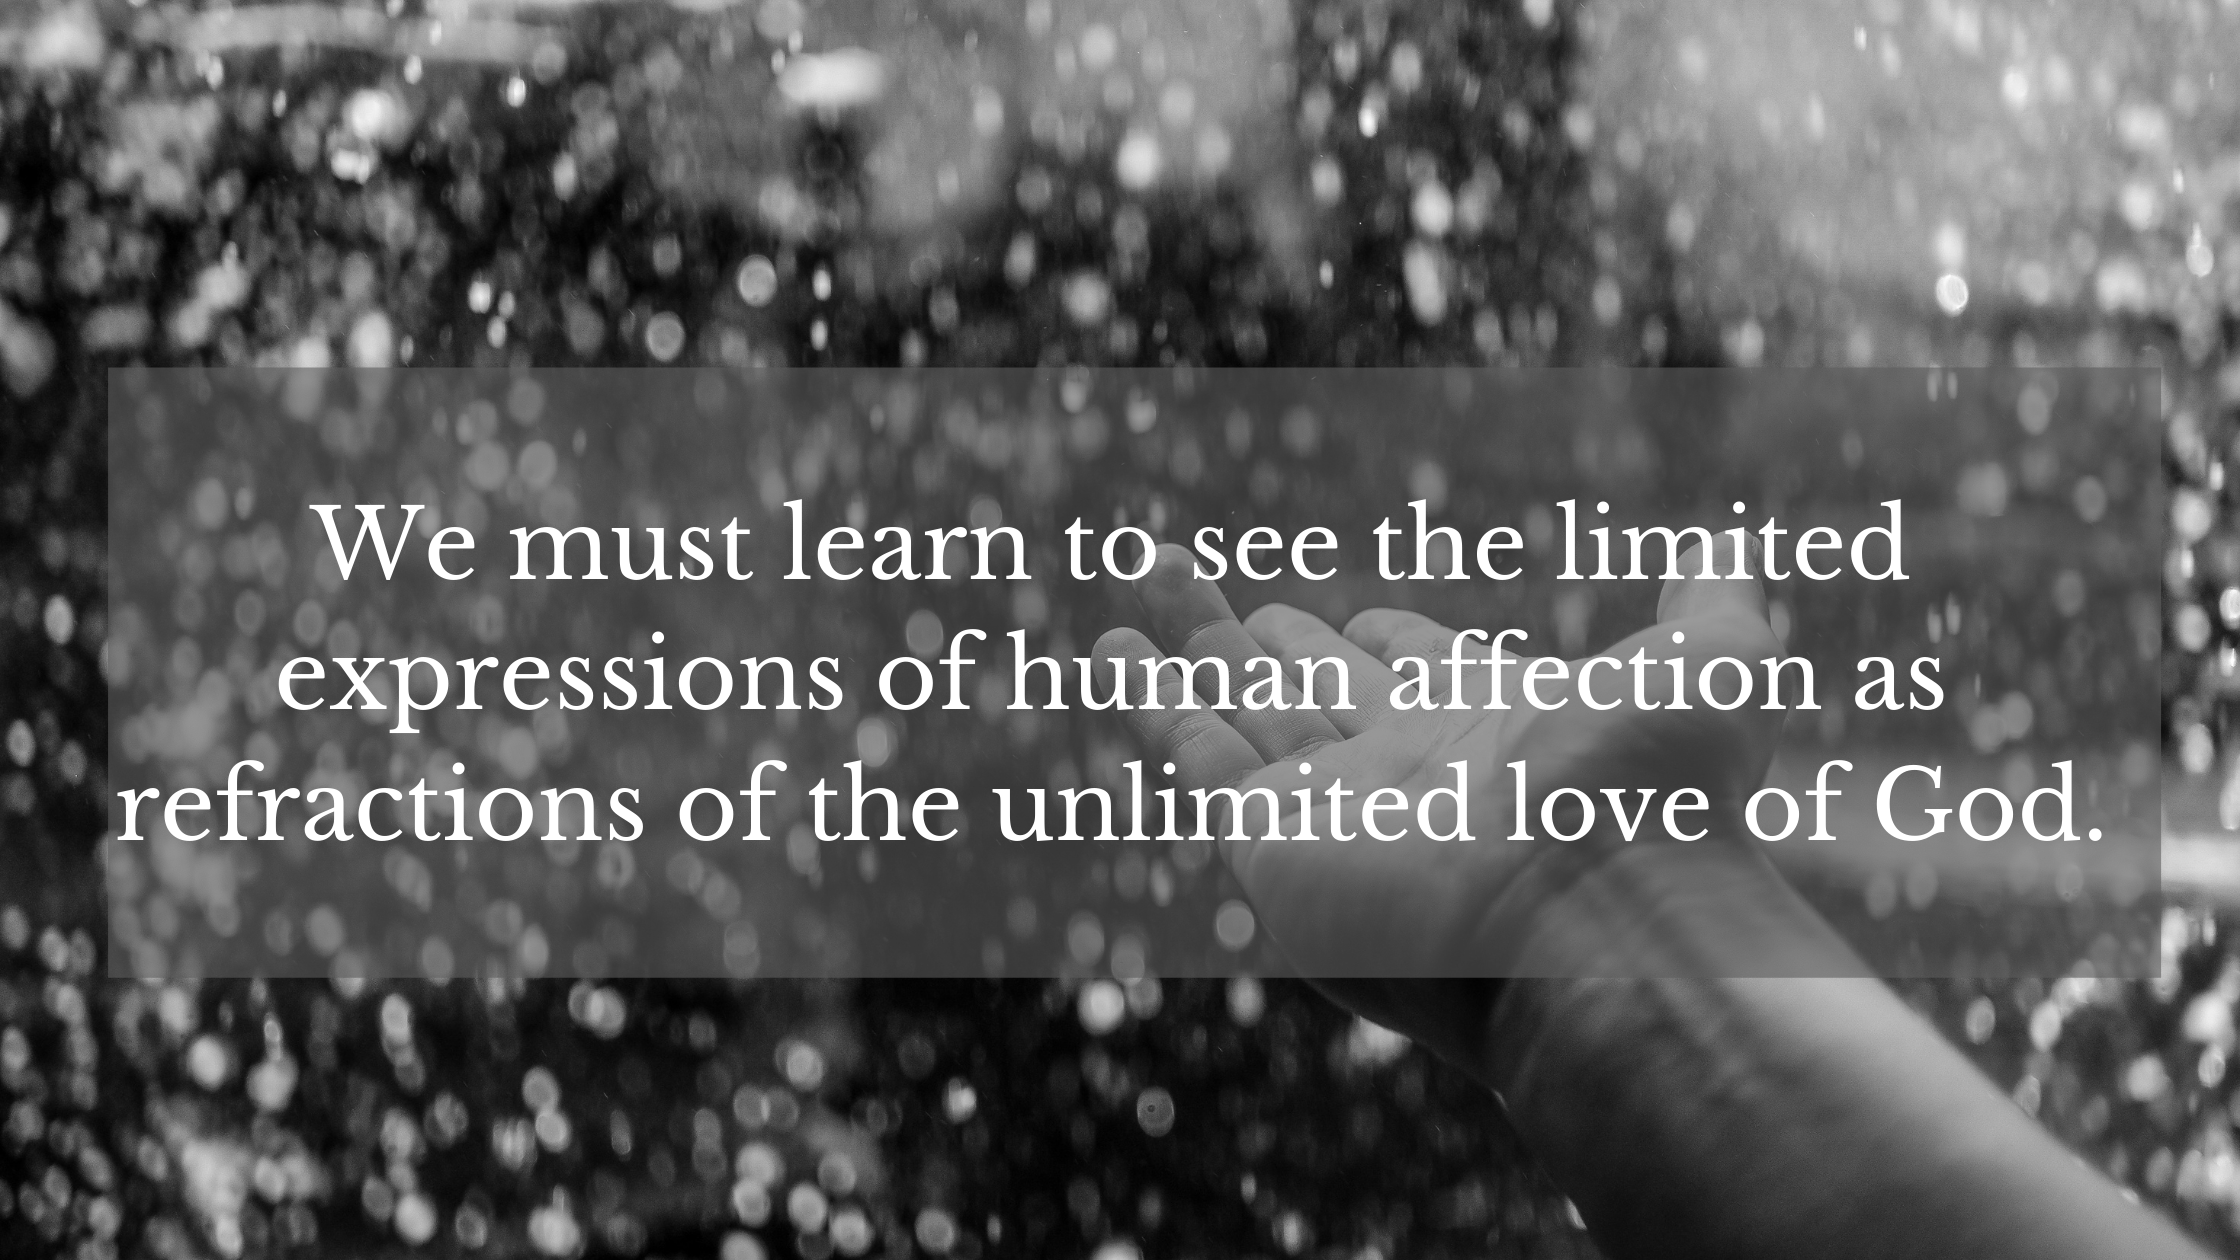 We must learn to see the limited expressions of human affection as refractions of the unlimited love of God.